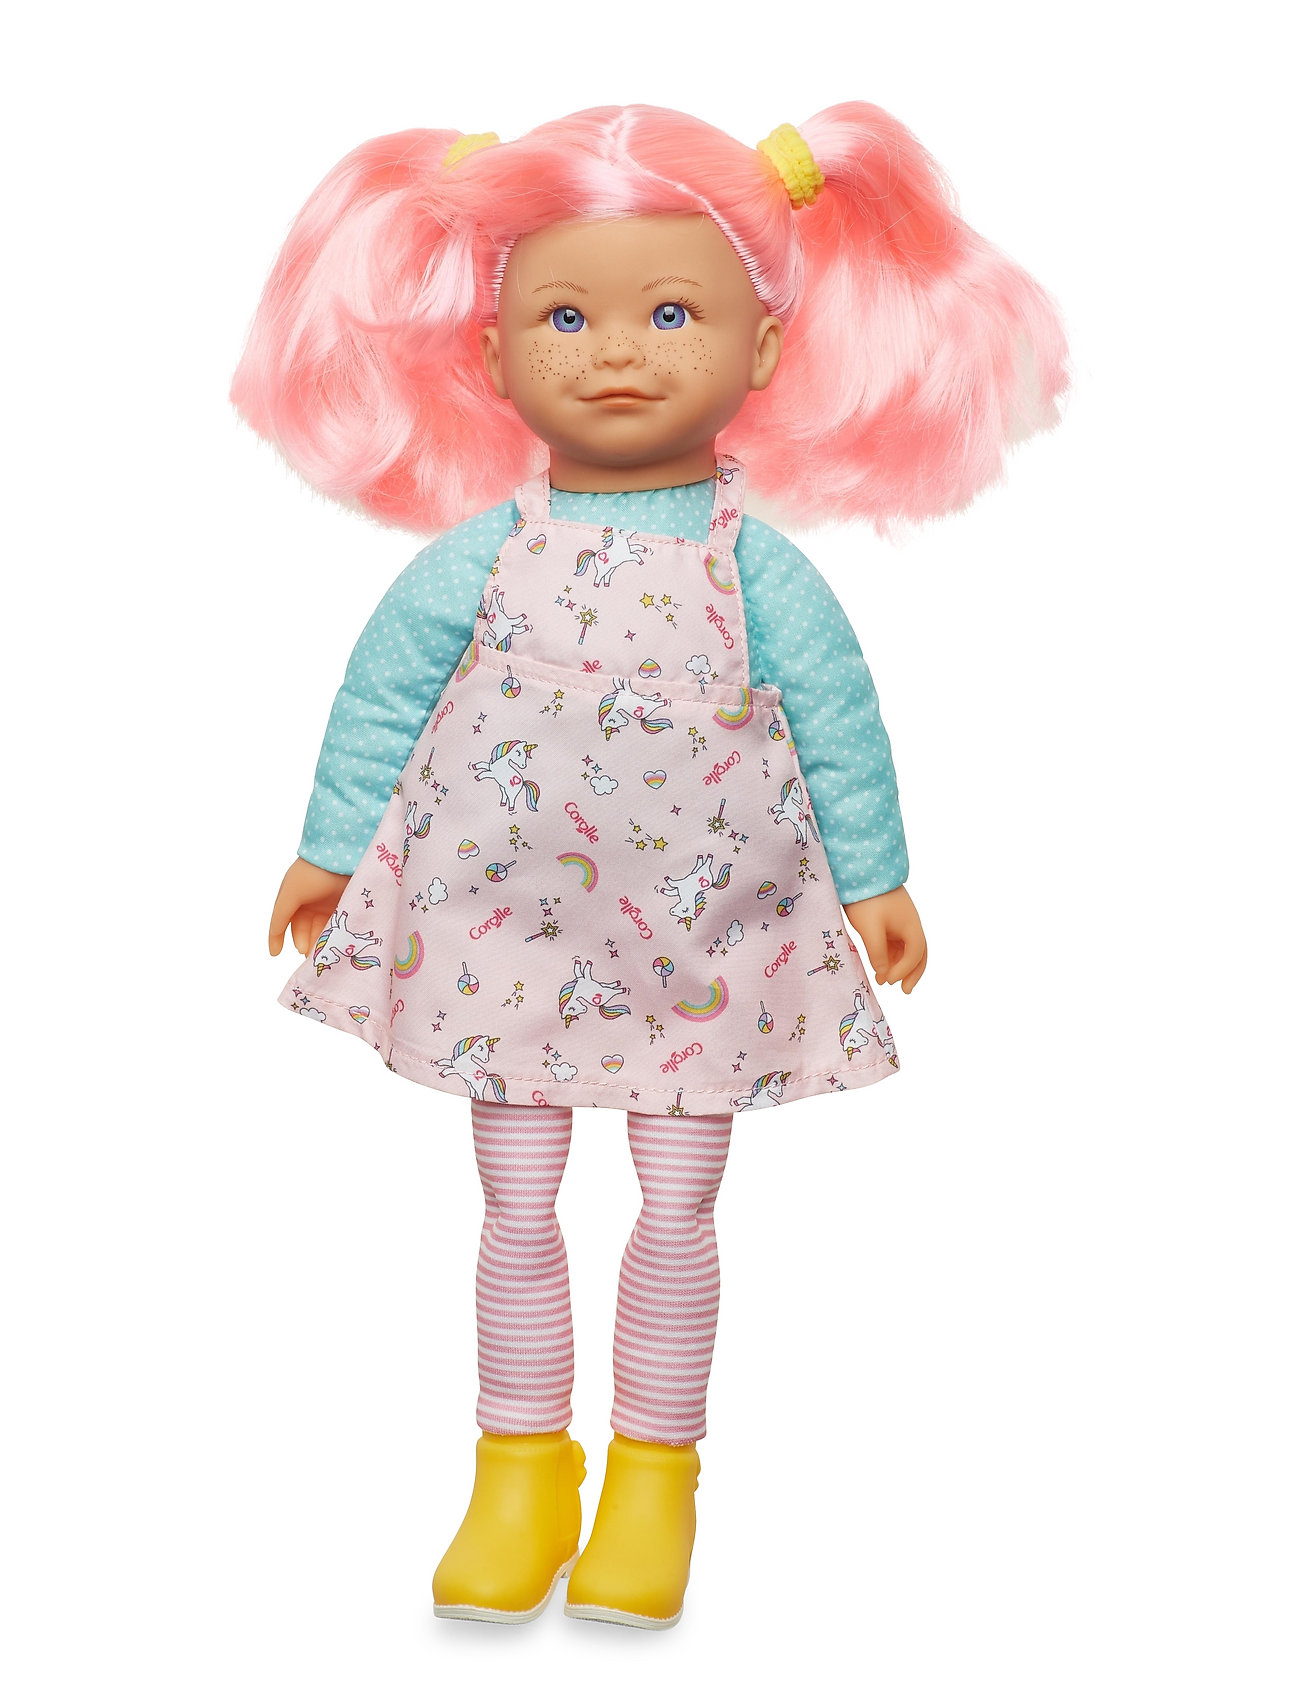 Corolle Rdc Rainbow Doll Praline Toys Dolls & Accessories Dolls Multi/patterned Corolle